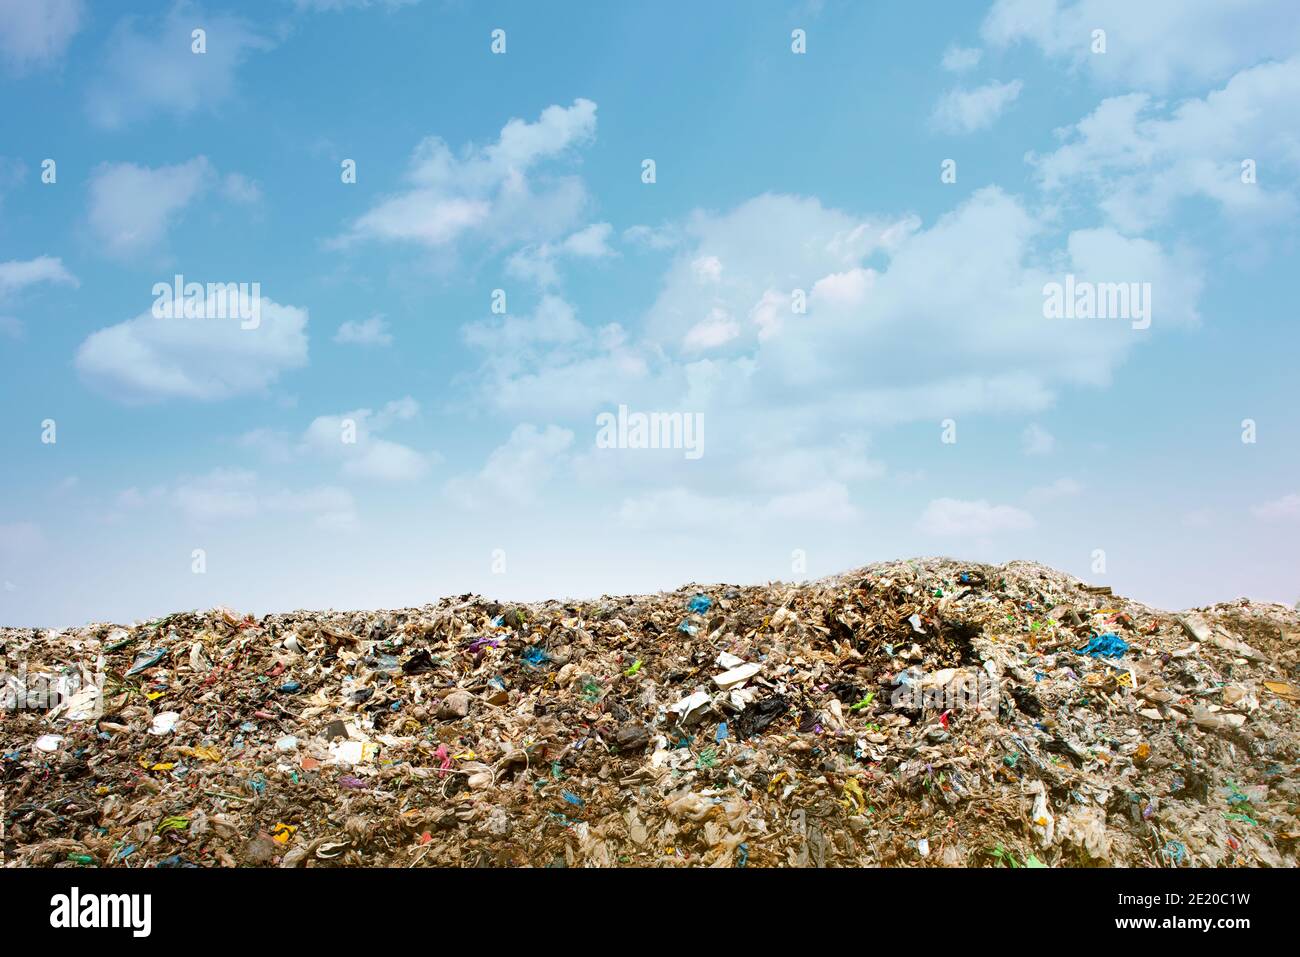 Pollution concept. Garbage pile in trash dump or landfill. Stock Photo